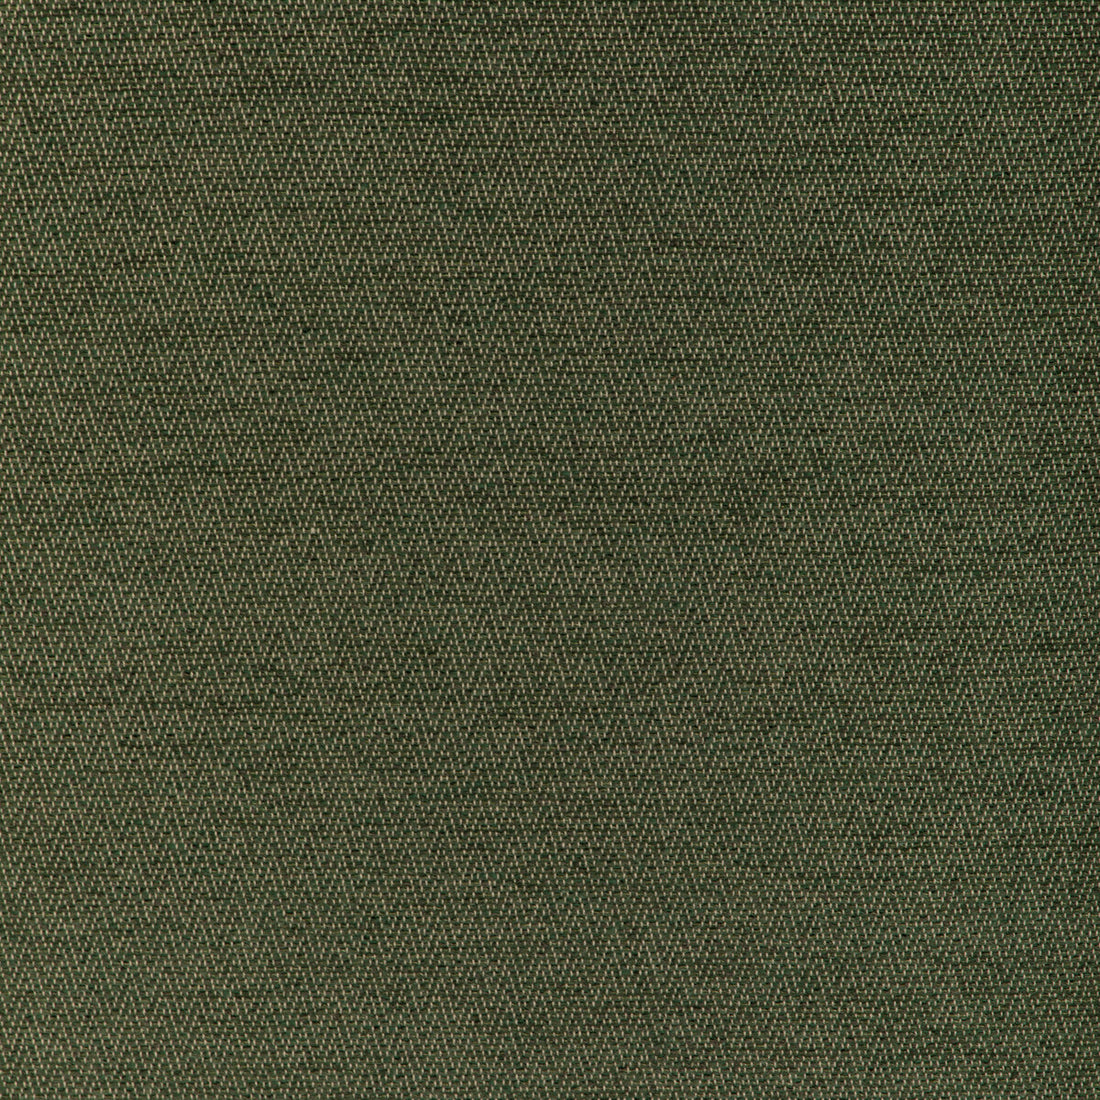 Beauvoir Texture fabric in green color - pattern 8023153.53.0 - by Brunschwig &amp; Fils in the Chambery Textures IV collection